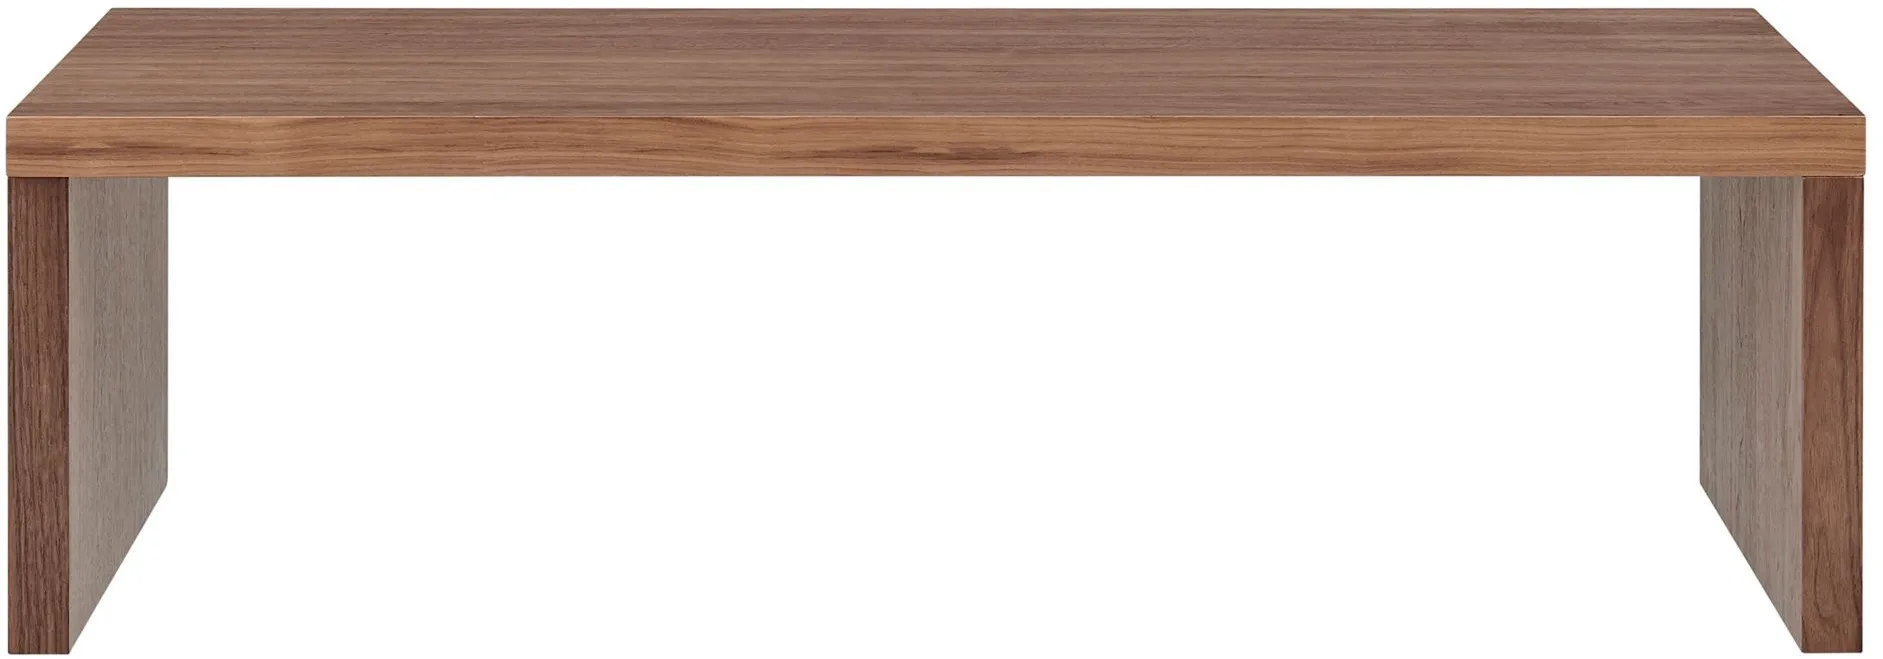 Abby 48" Coffee Table in Walnut by EuroStyle